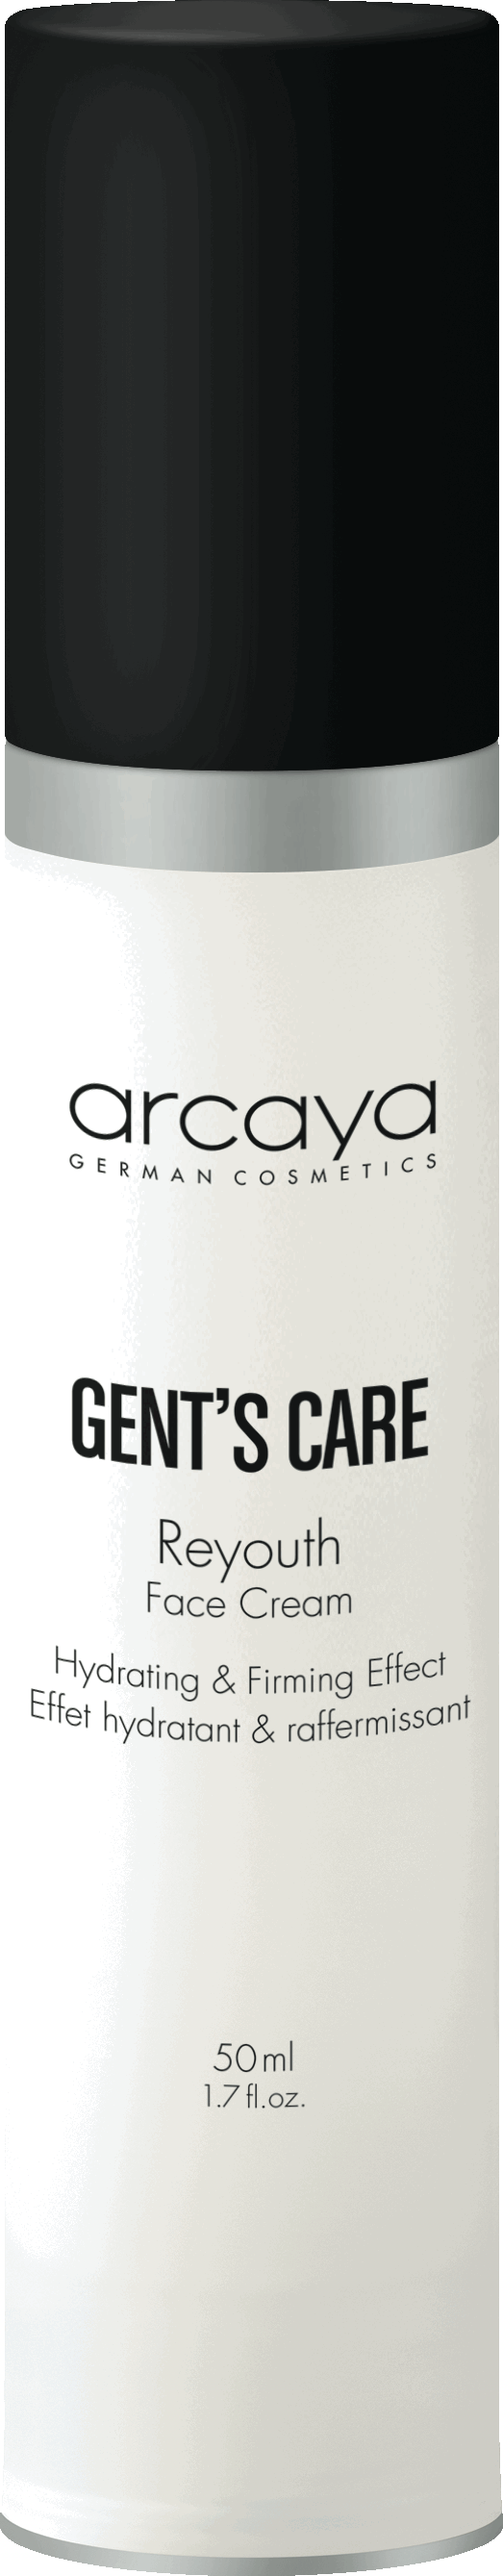 Gent's Care Reyouth Face Cream